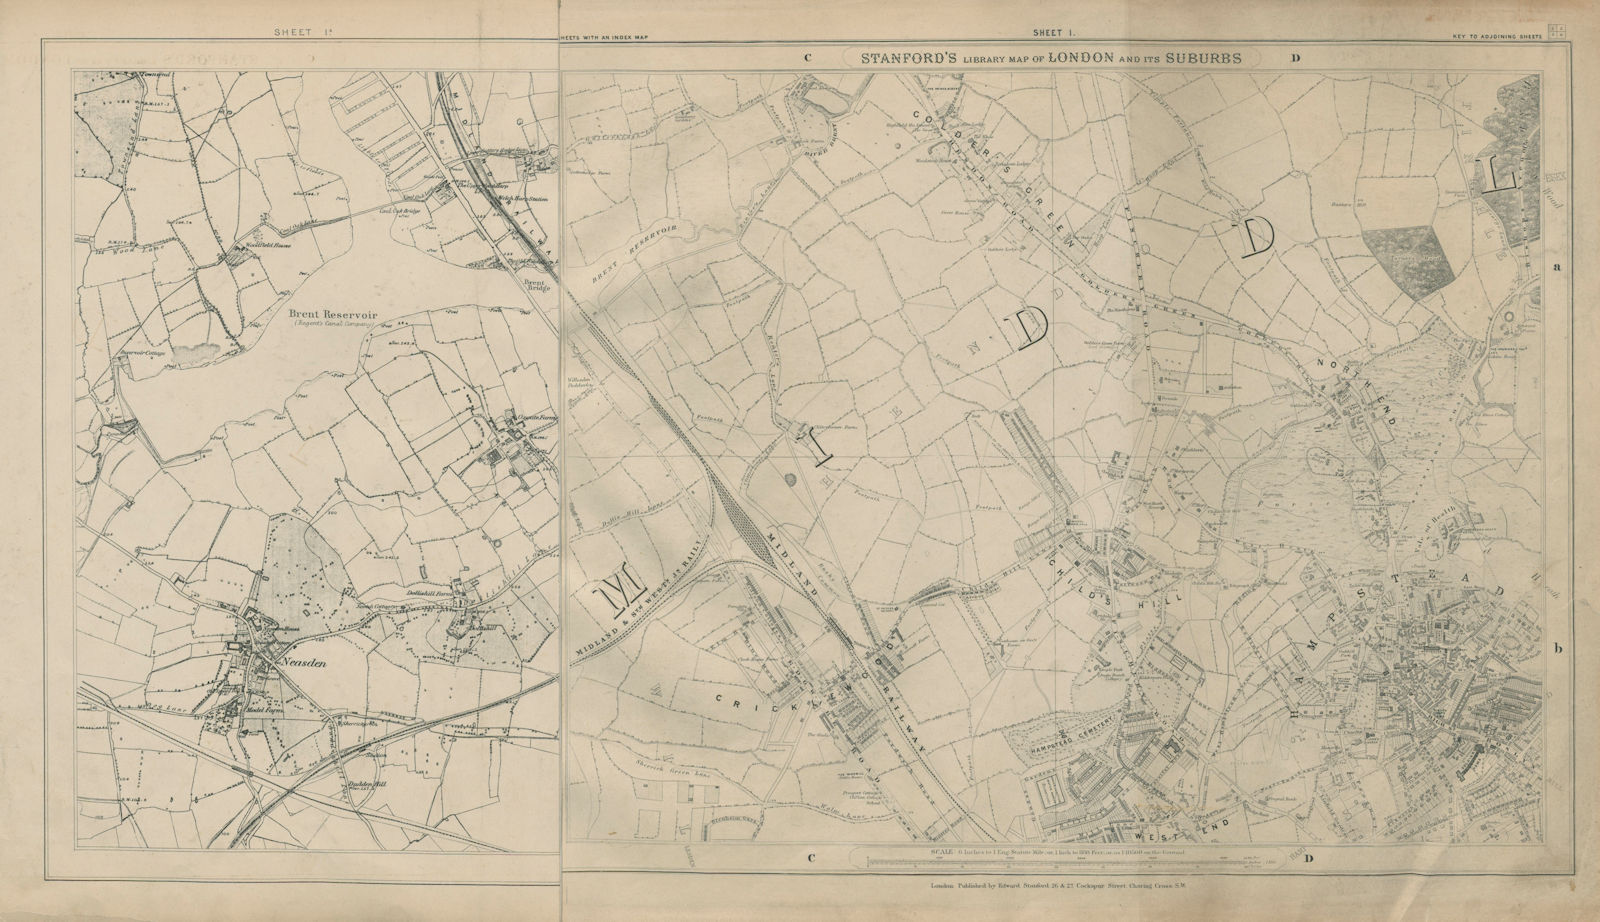 Associate Product Stanford Library map of London Sheet 1/a Hampstead Golder's Grn Cricklewood 1895